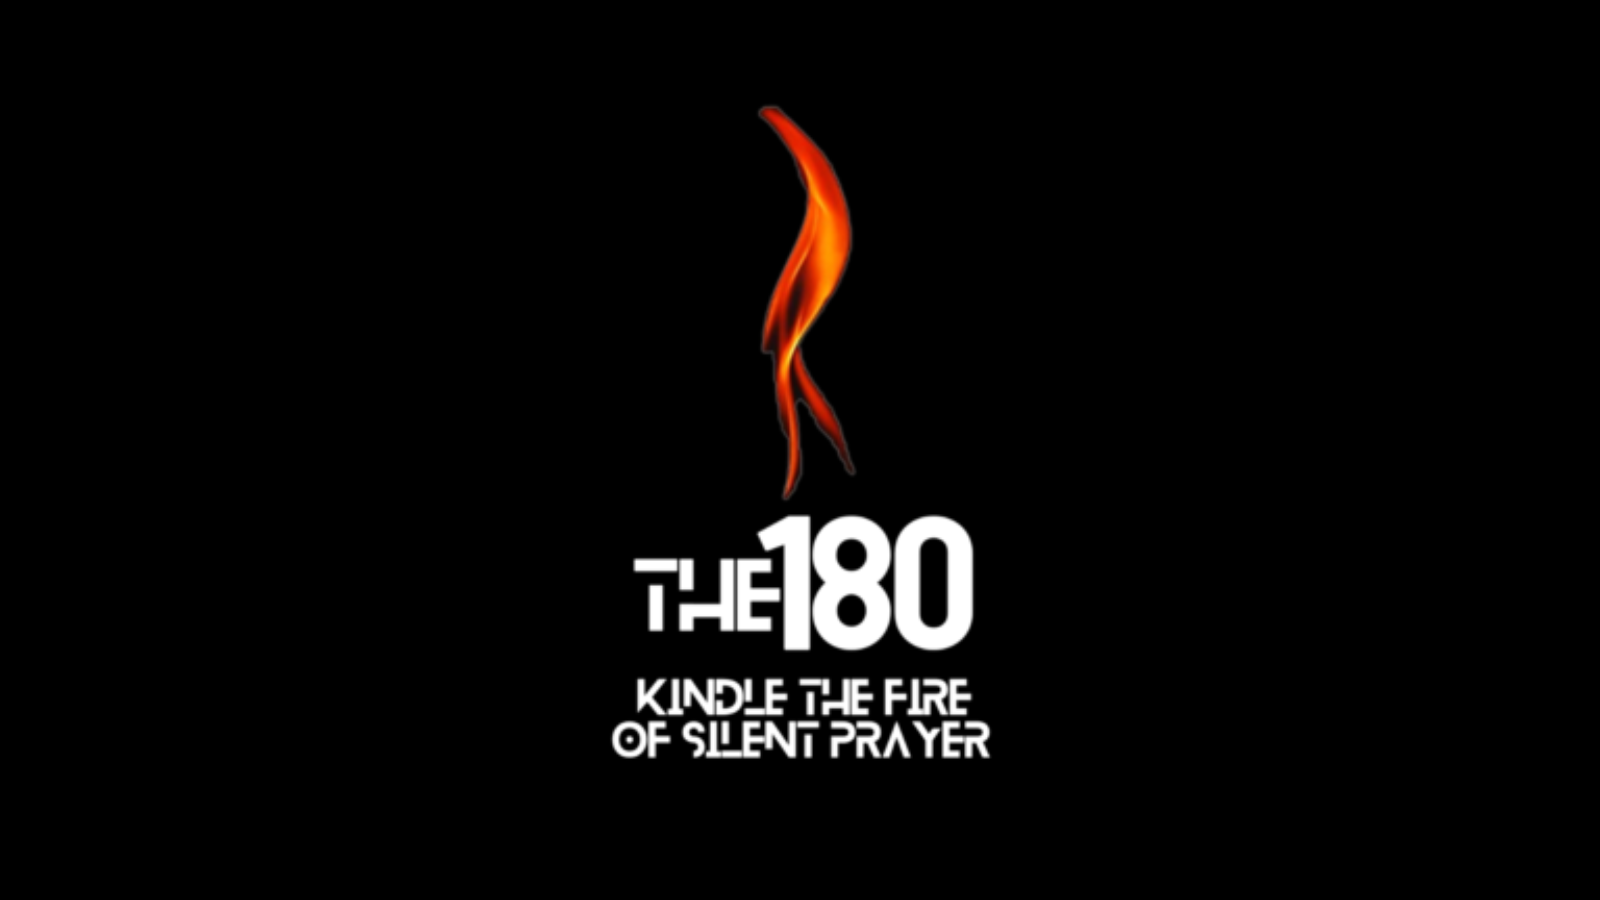 The 180 Kindle the Fire of Silent Prayer